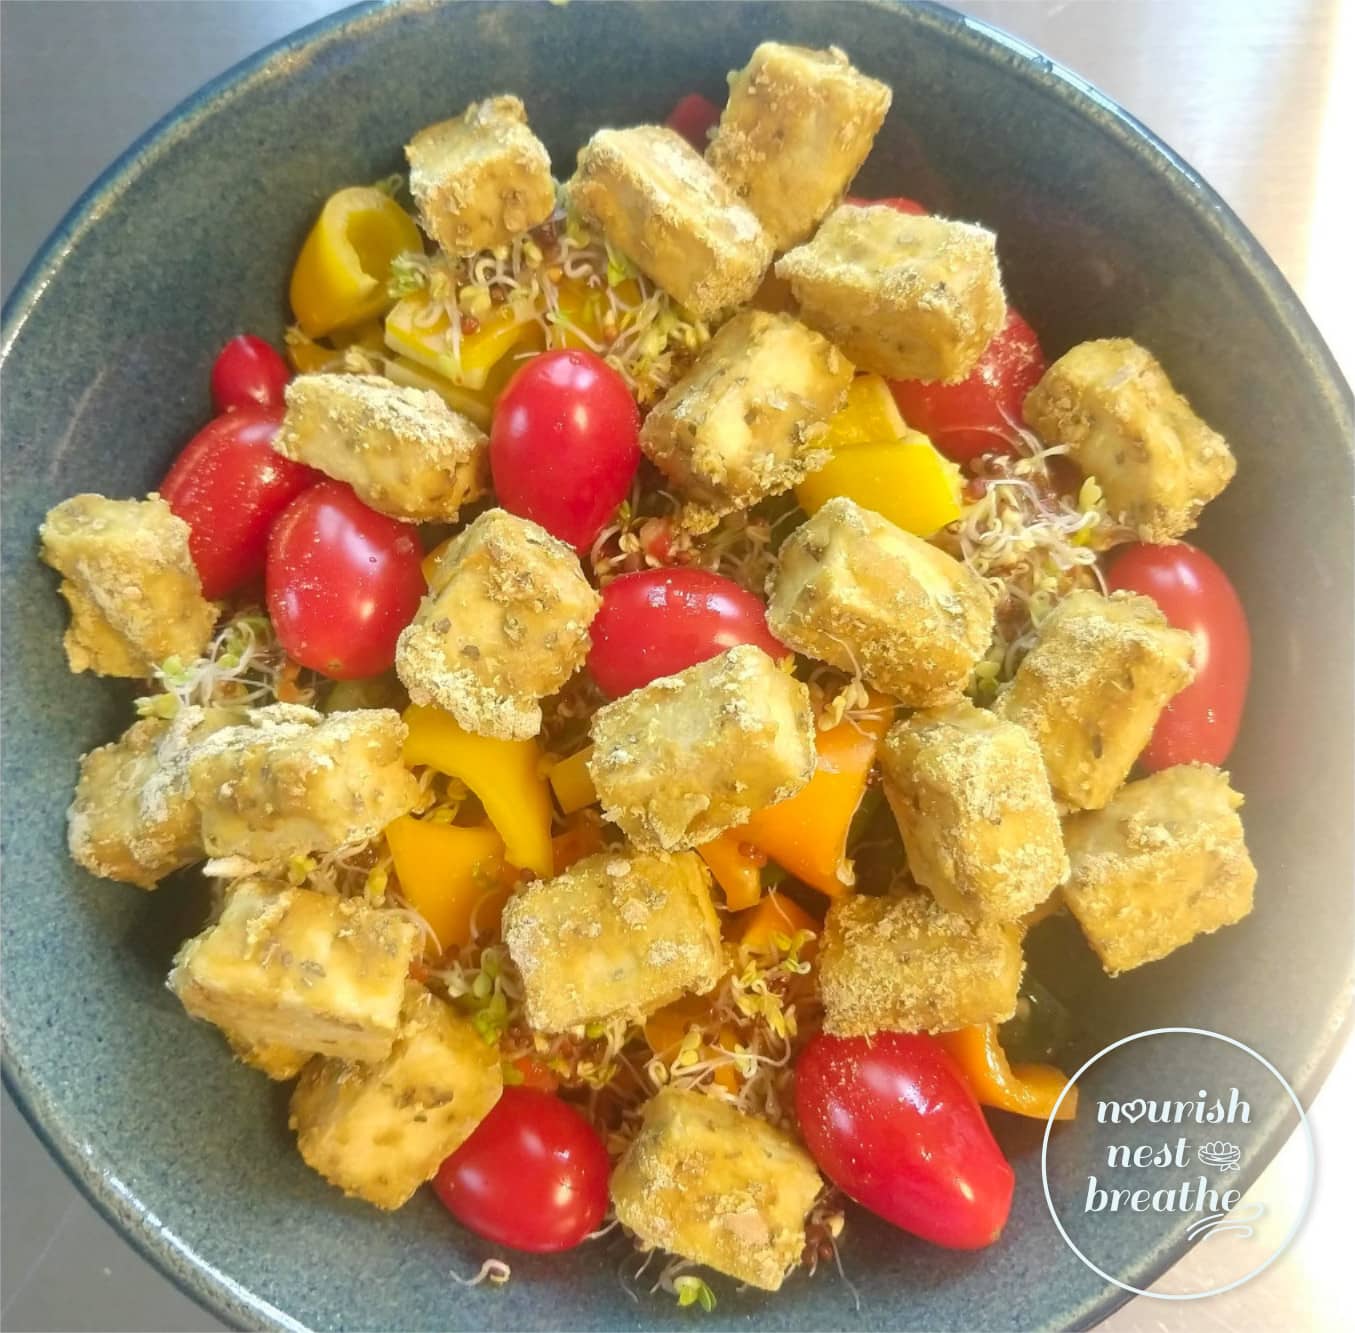 Salad topped with nutritional yeast baked tofu